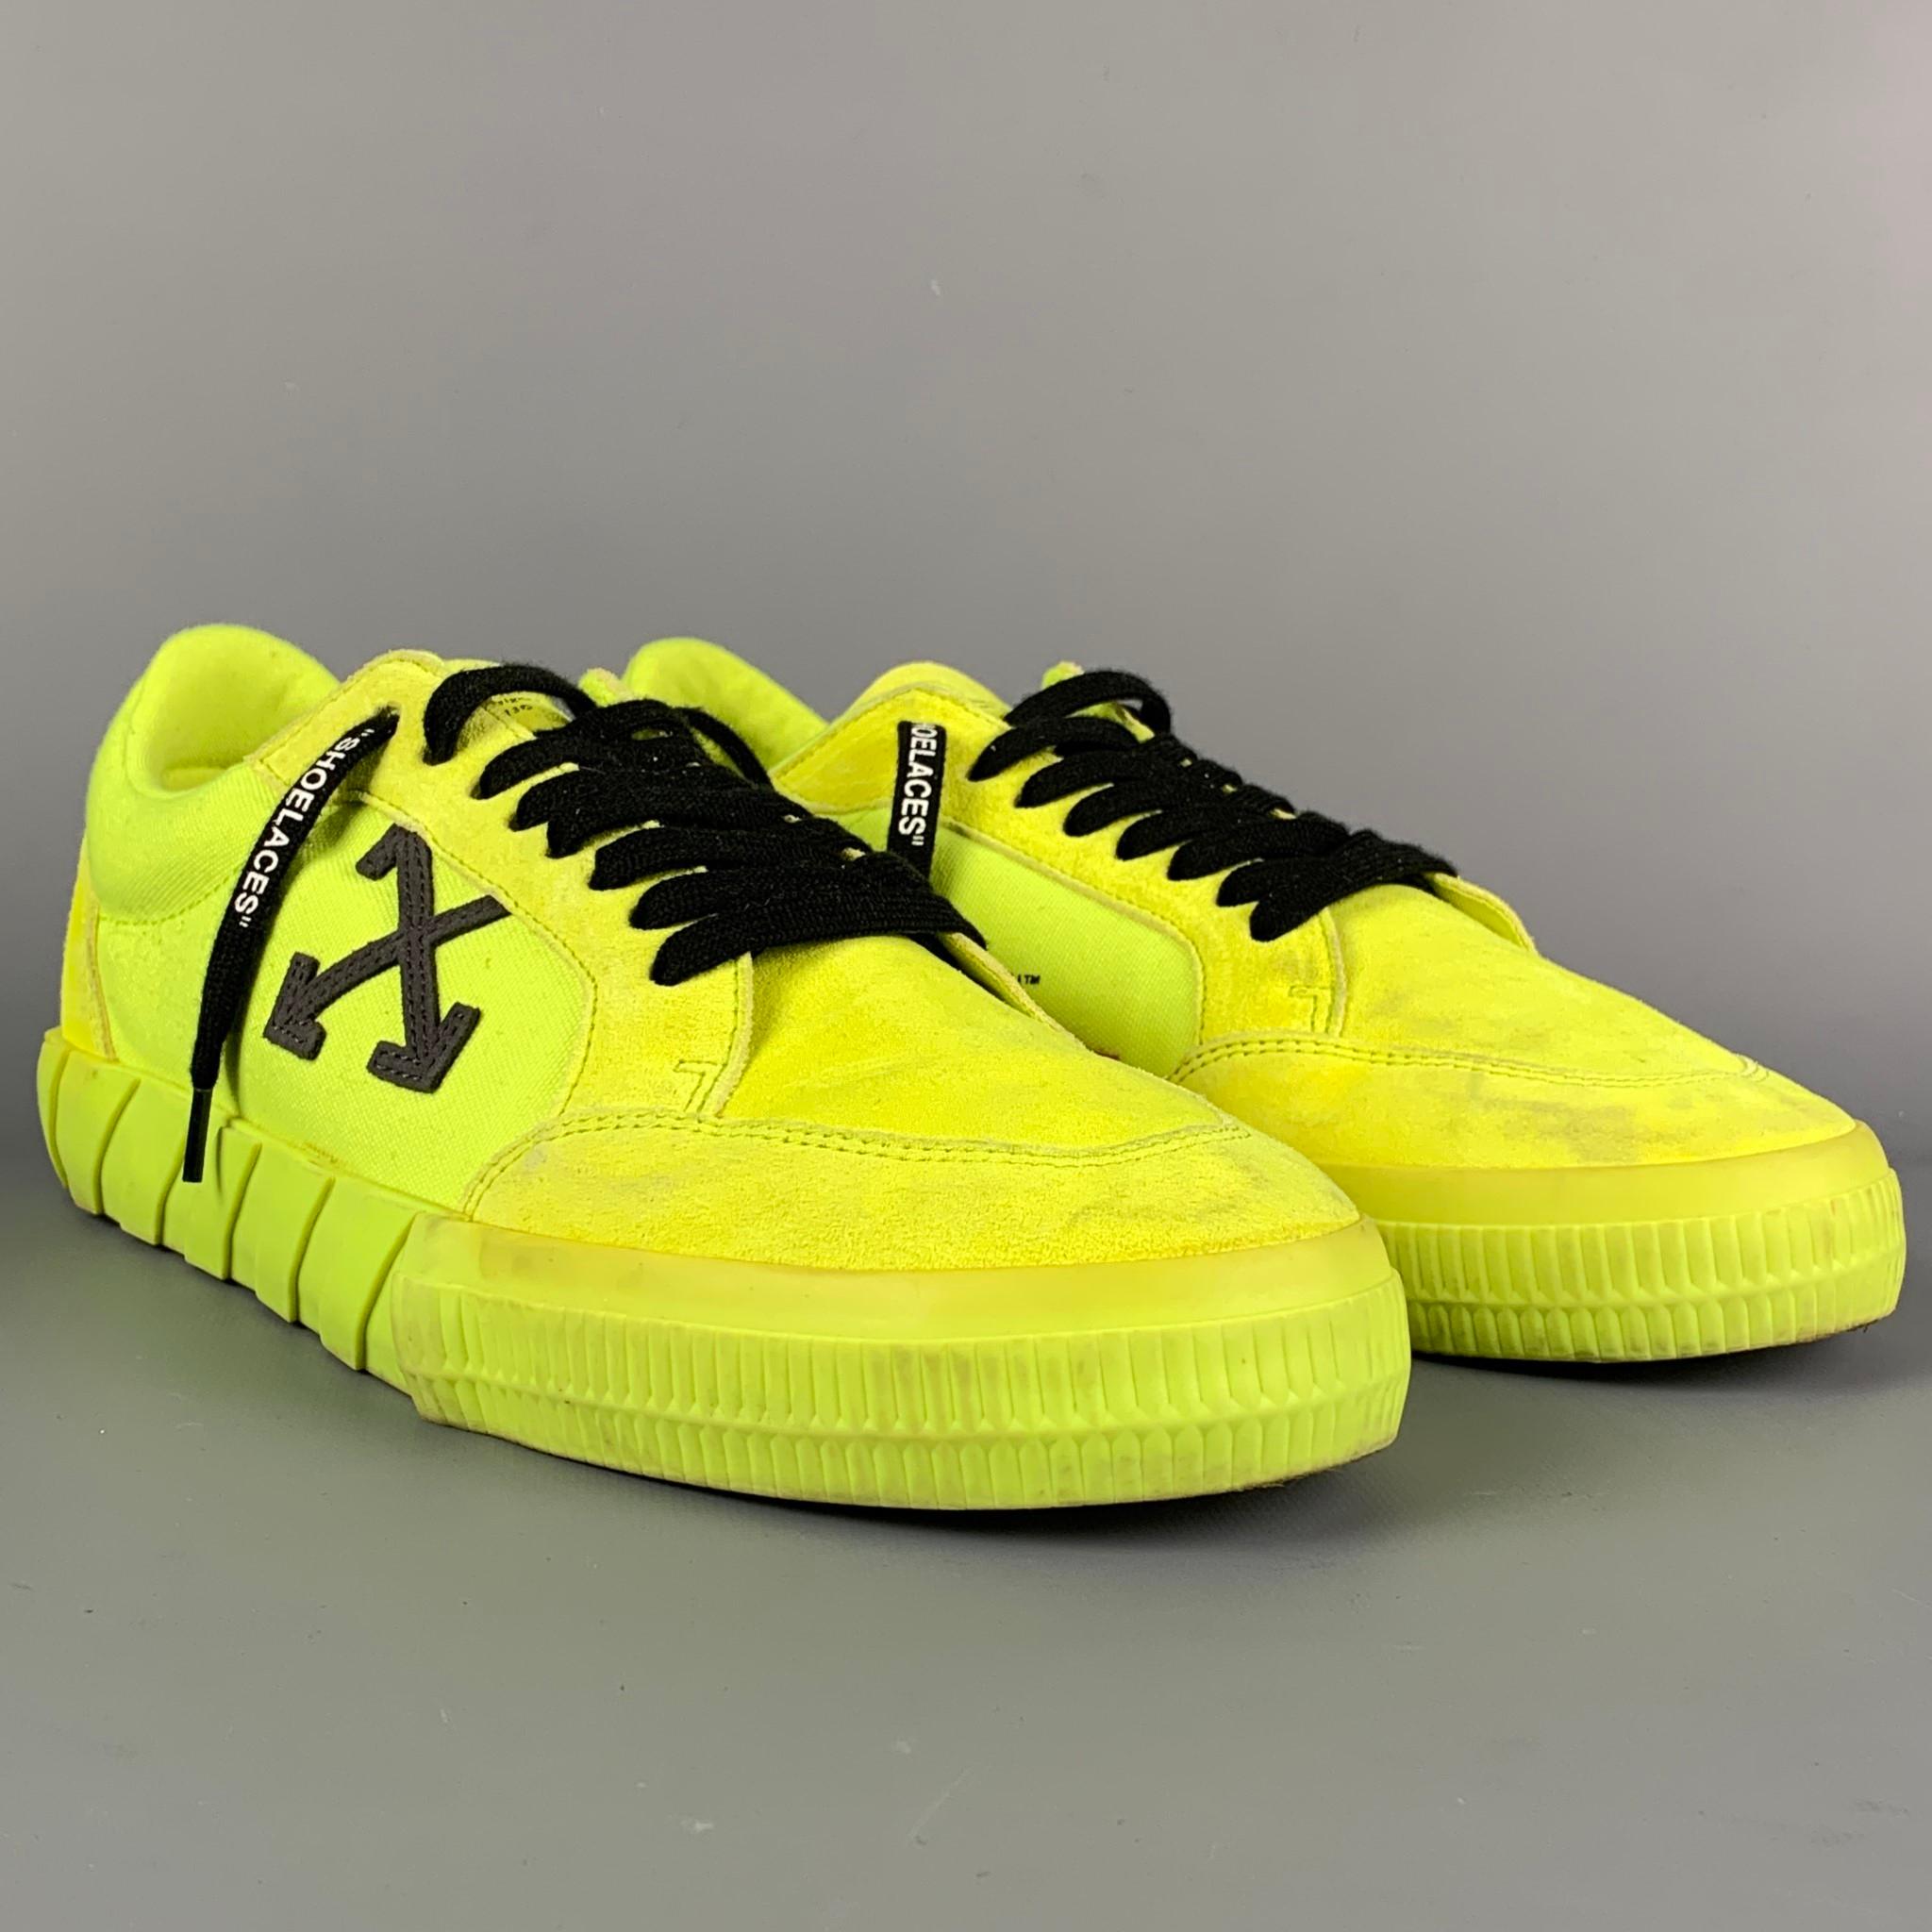 OFF-WHITE by Virgin Abloh 'Low Vulcanized Fluo Yellow' sneakers comes in a neon yellow suede featuring a low top style, embroidered black arrows, rubber sole, and a lace up closure. Made in Italy.

Good Pre-Owned Condition. Light wear at